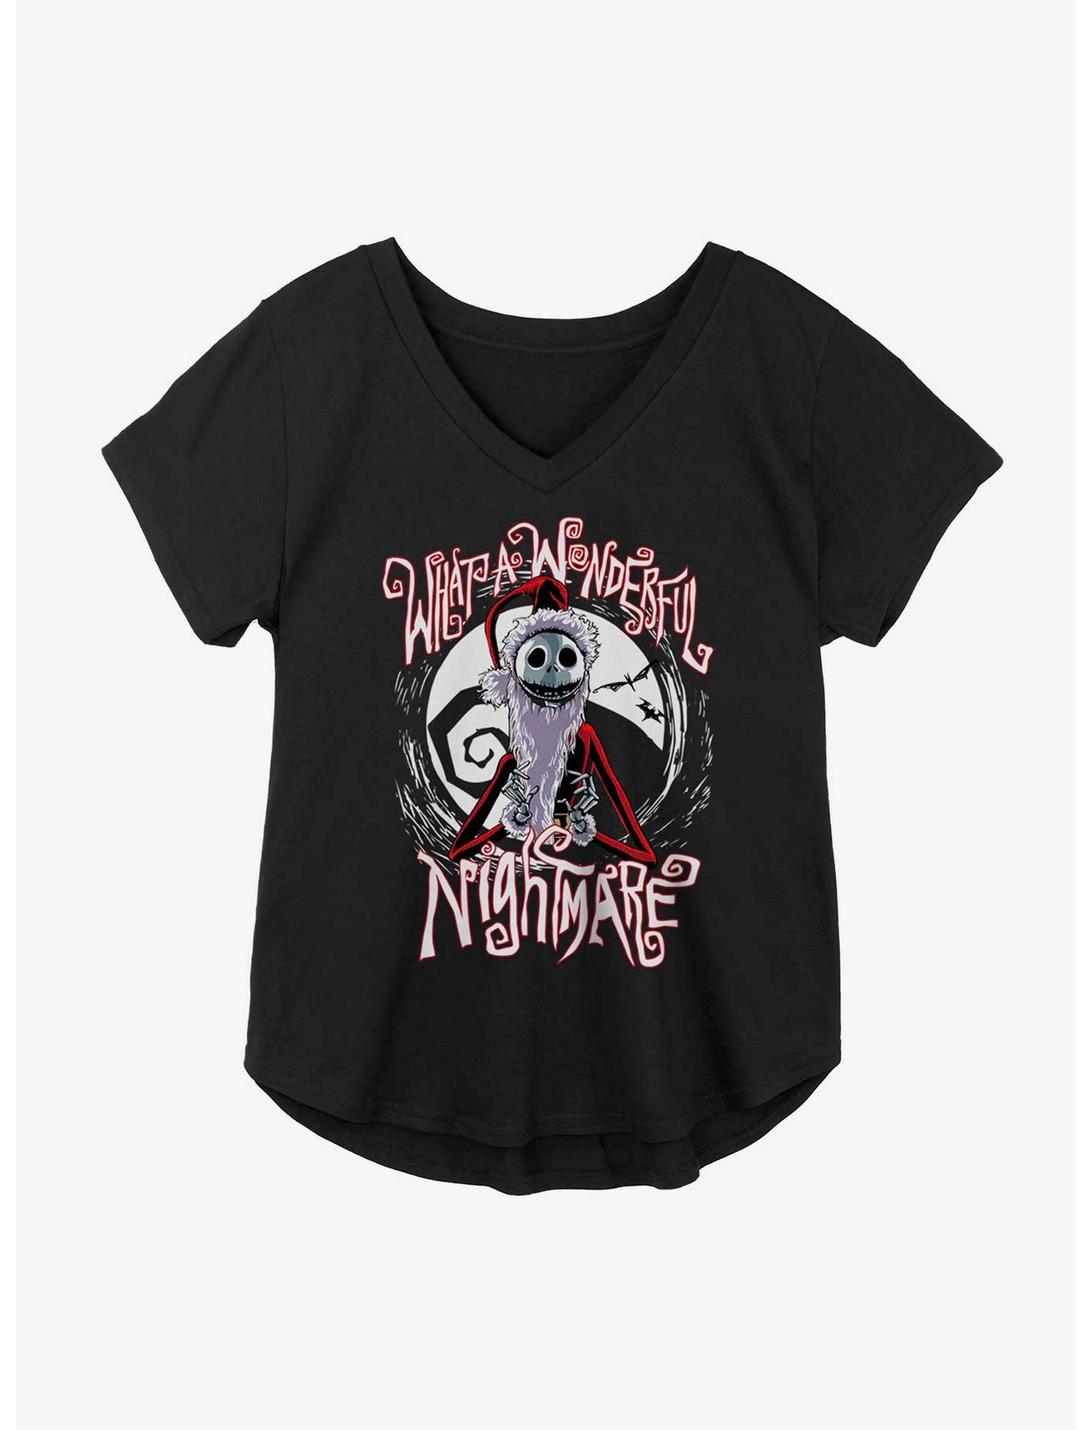 The Nightmare Before Christmas What A Wonderful Nightmare Girls Plus Size T-Shirt, BLACK, hi-res